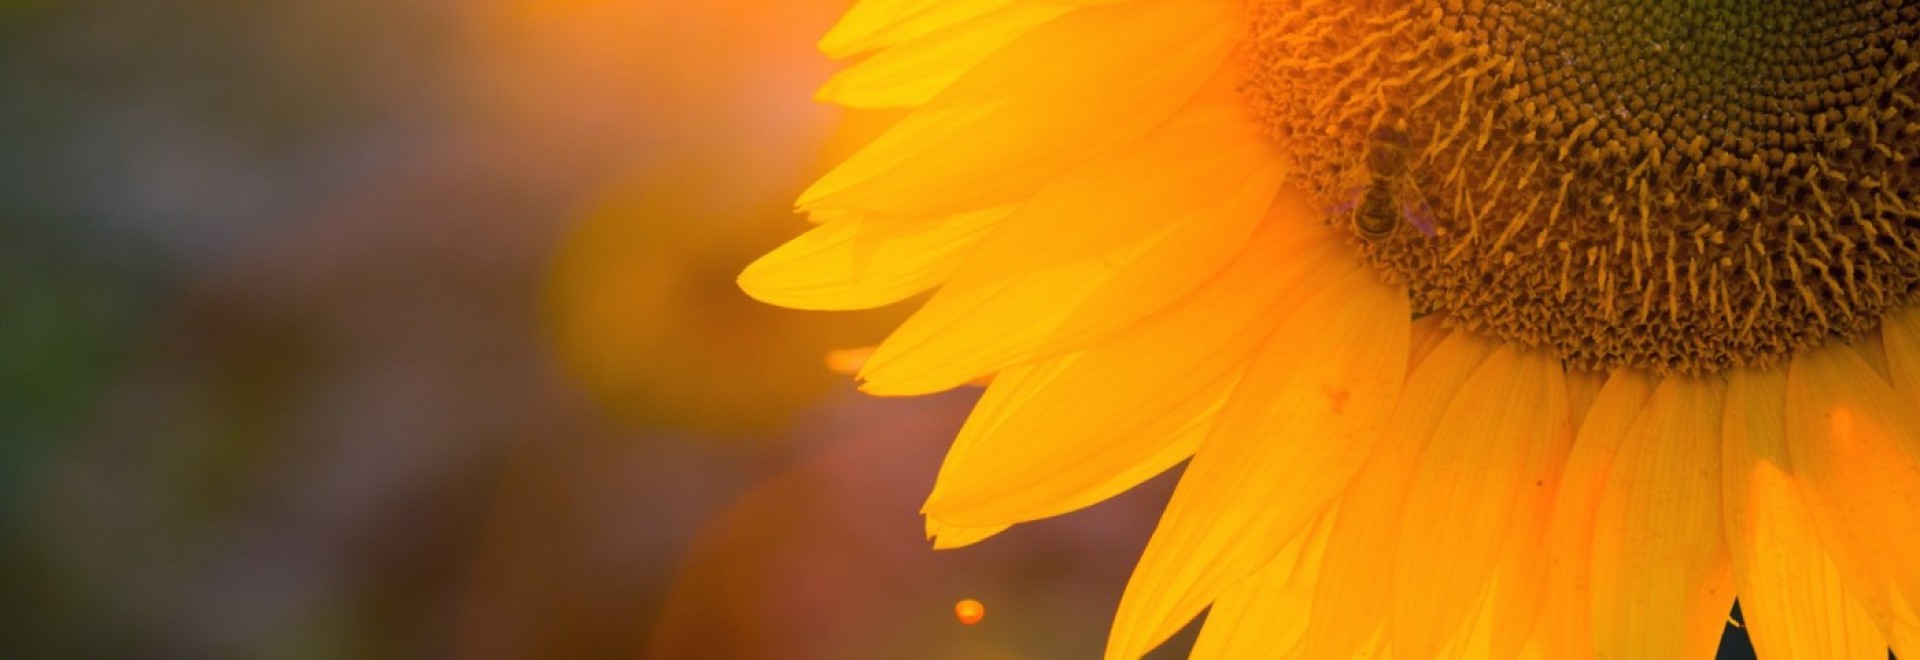 1920x660 Sunflower general give